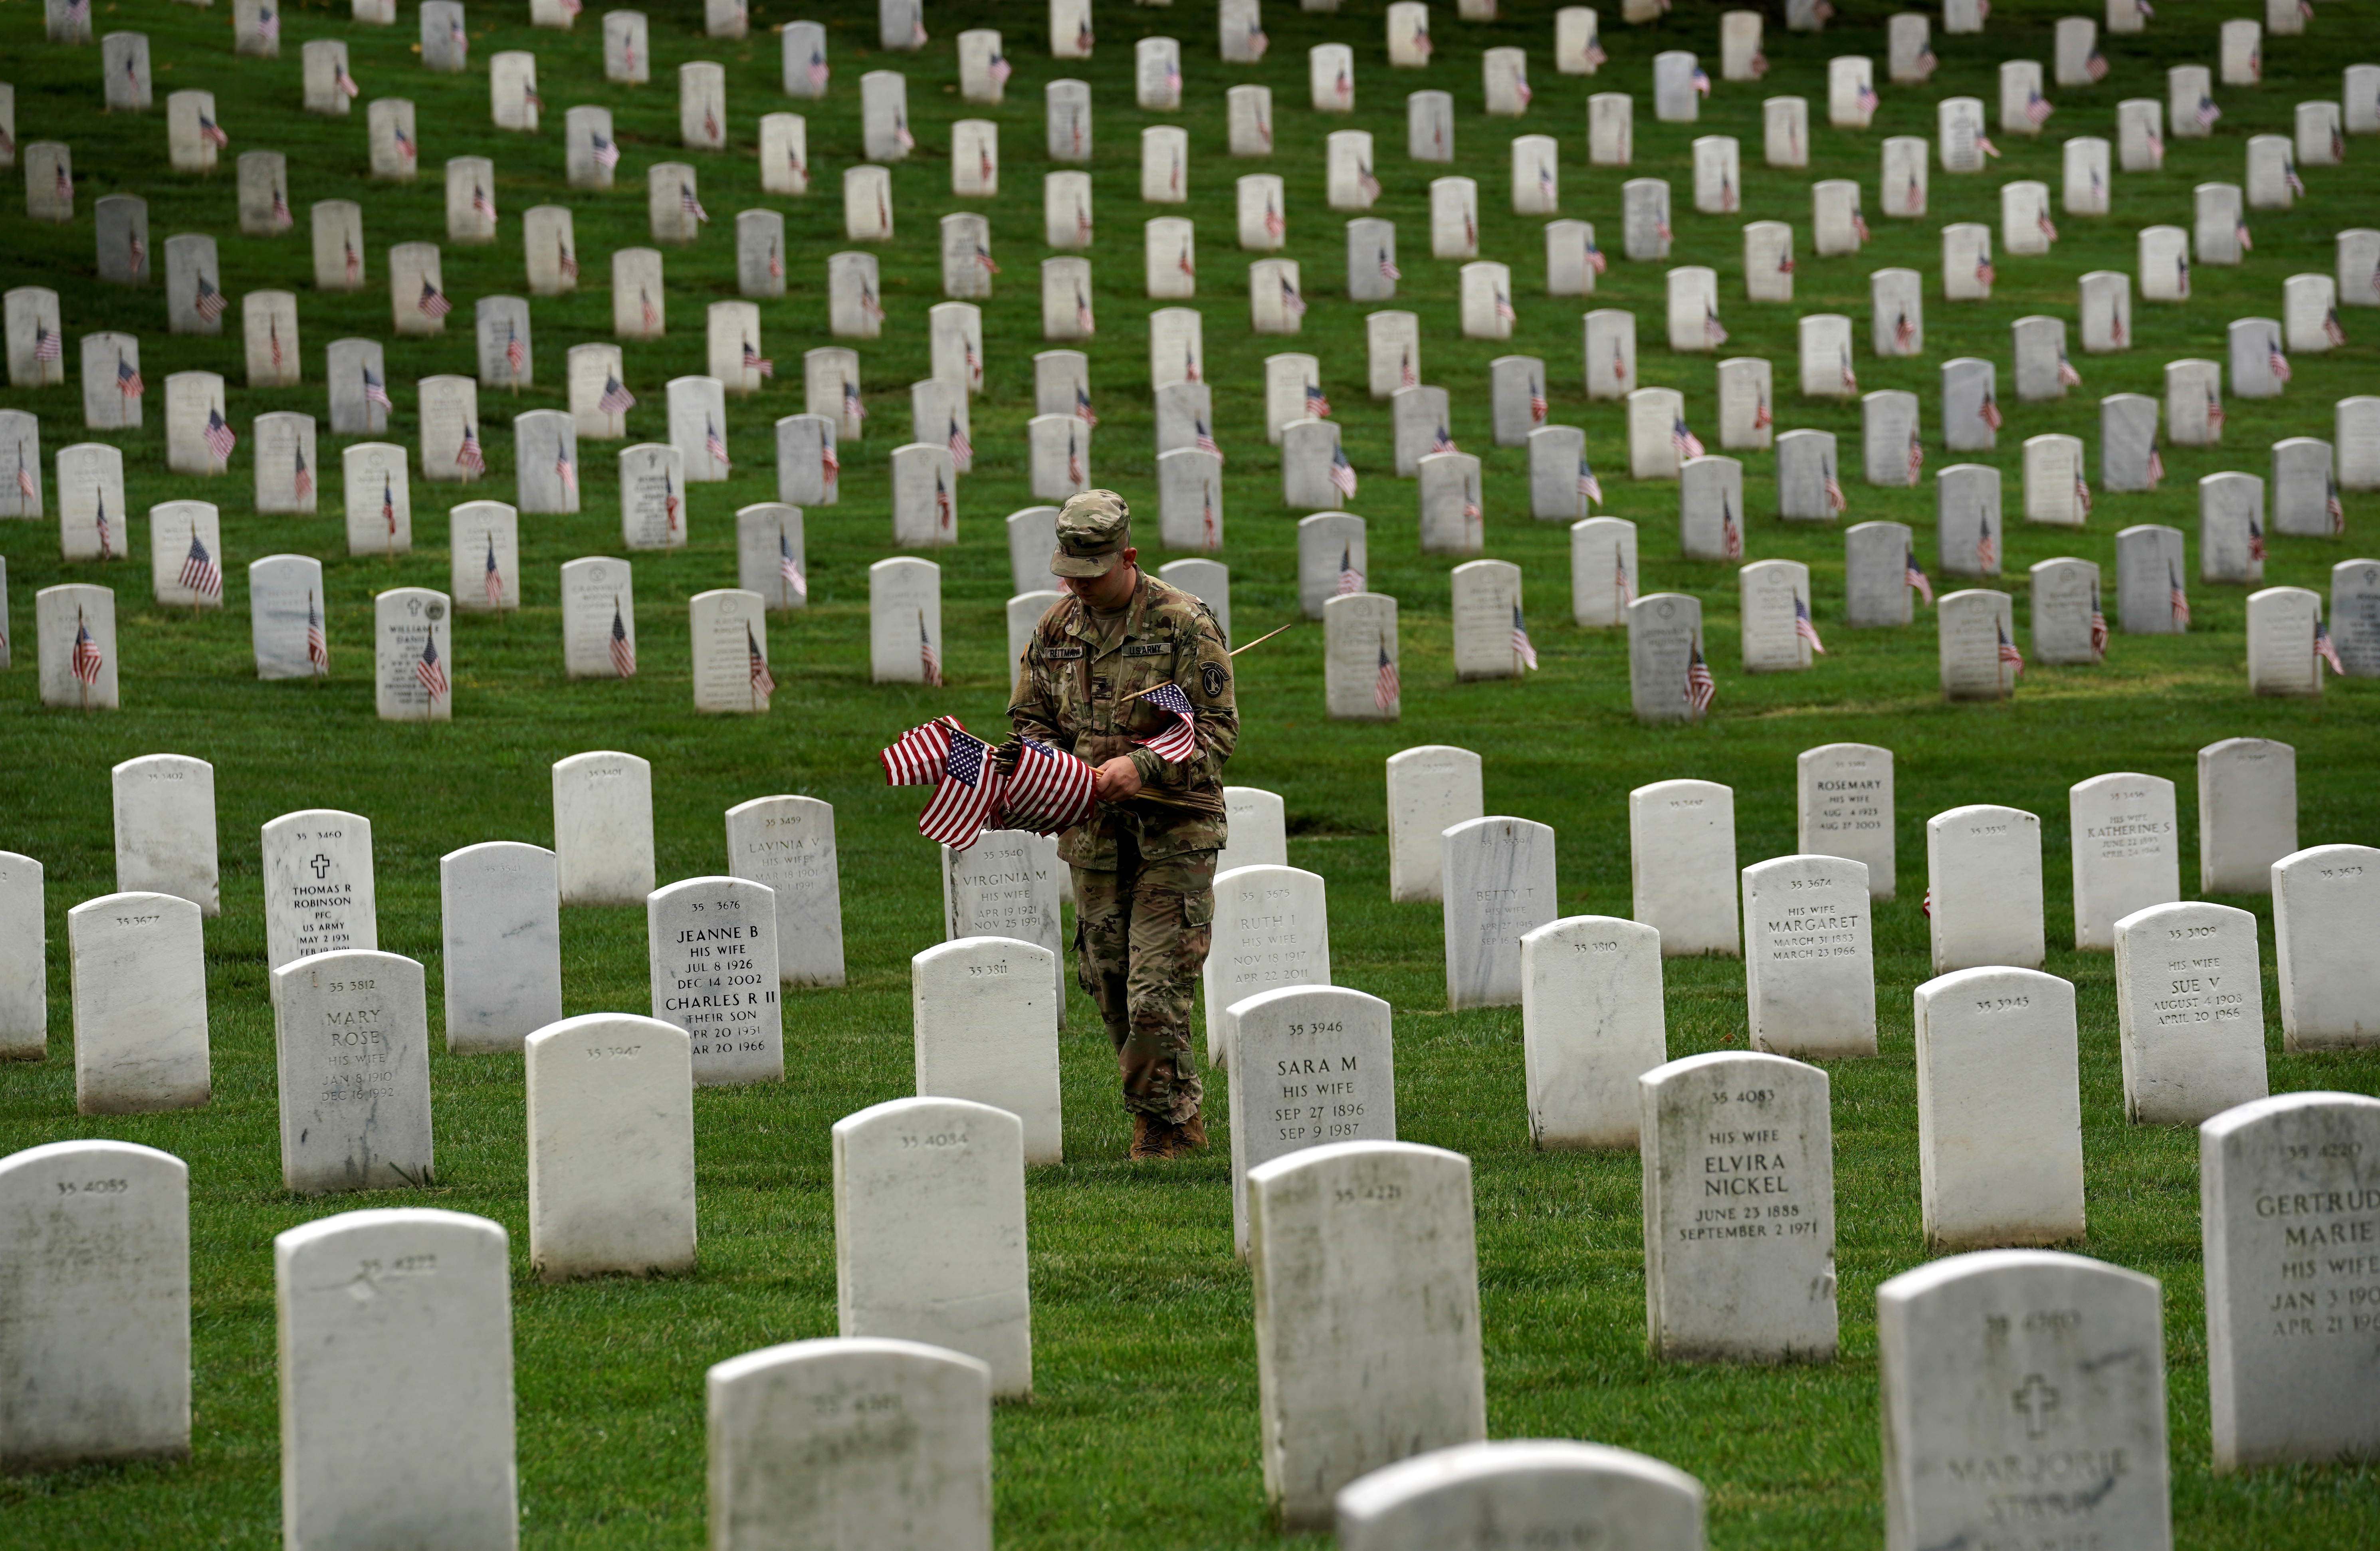 Flags are placed on headstones for Memorial Day at Arlington Cemetery